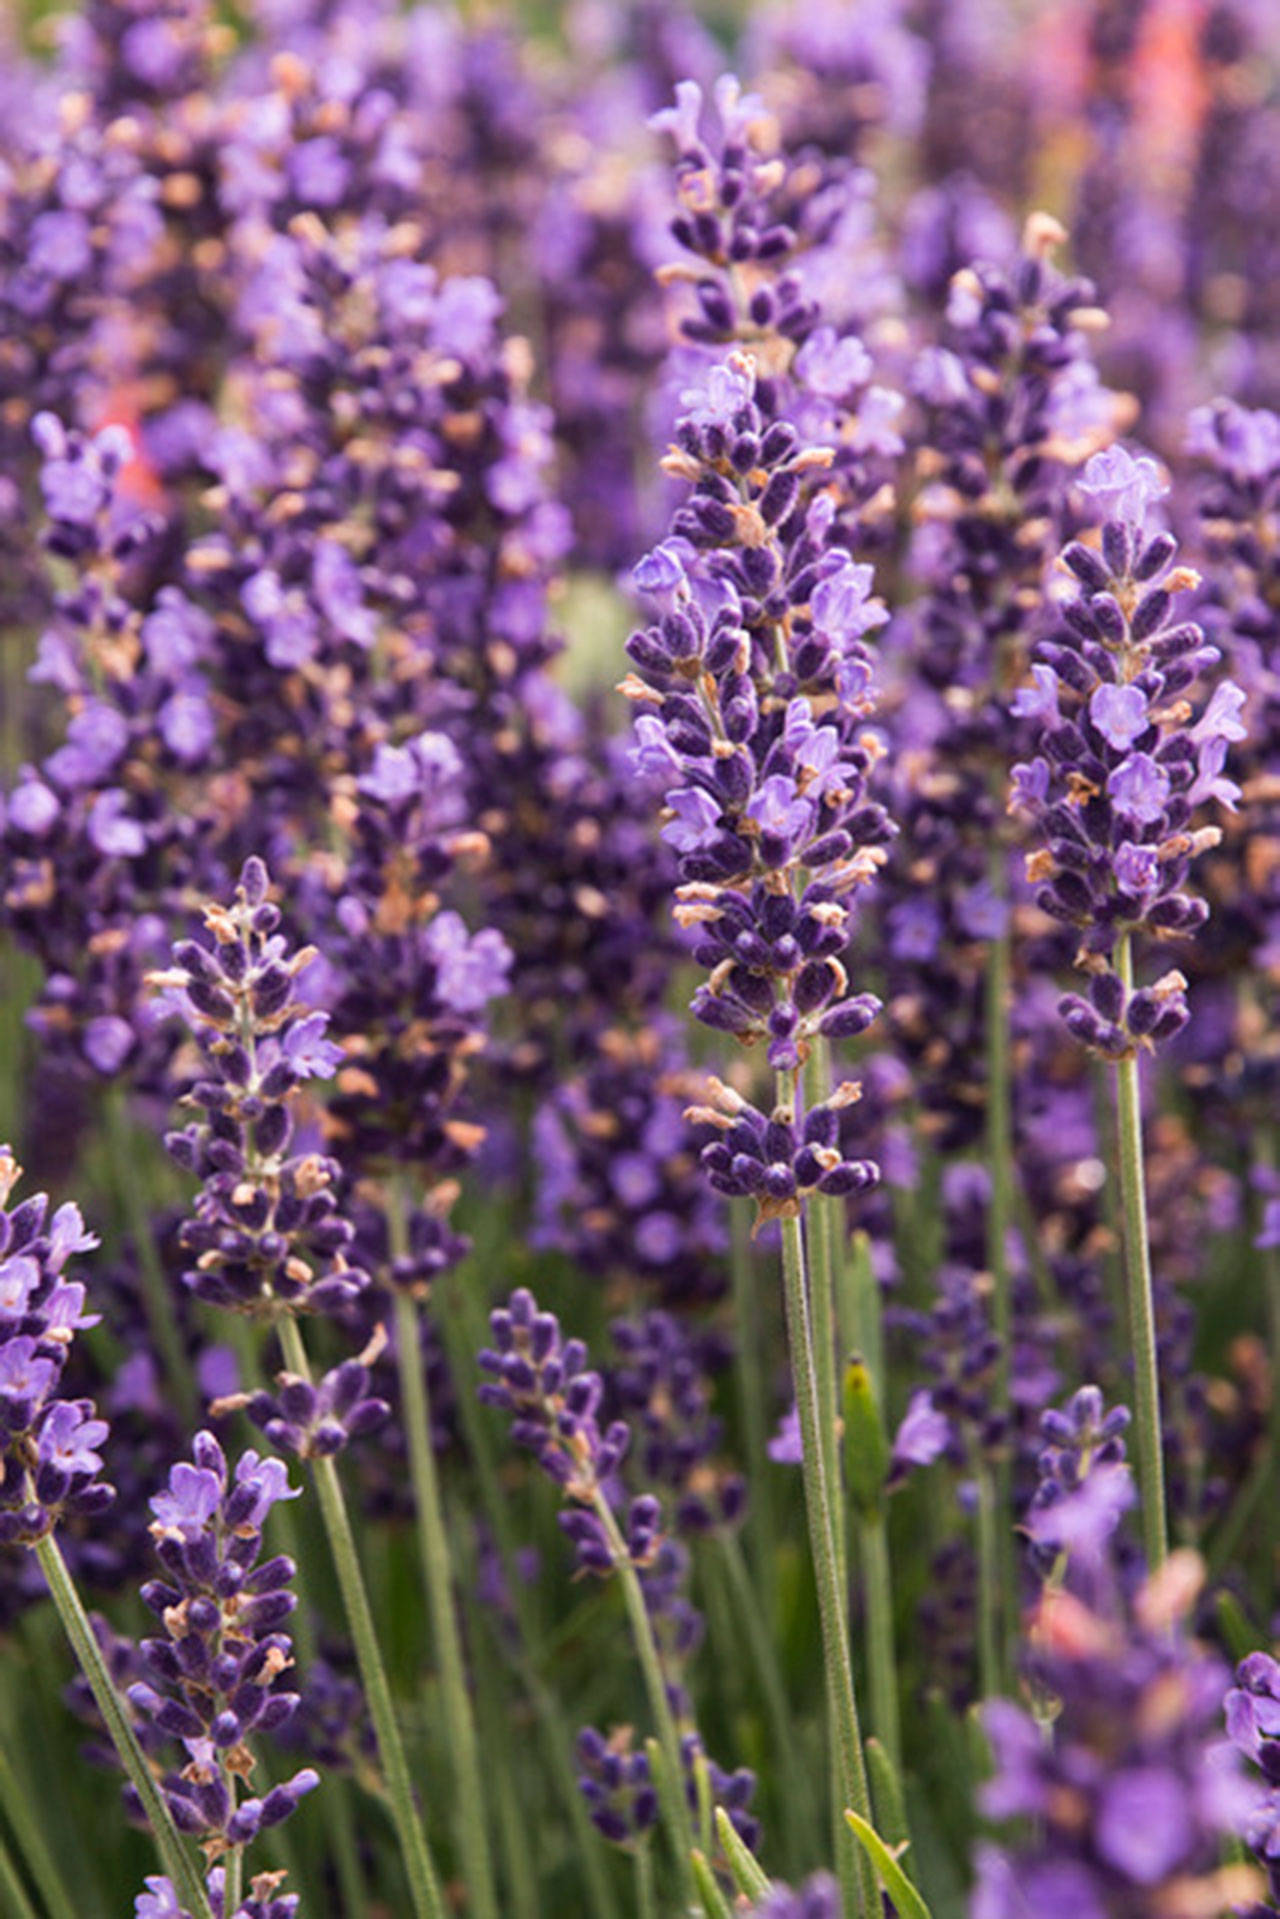 Lavender can be used for so many things